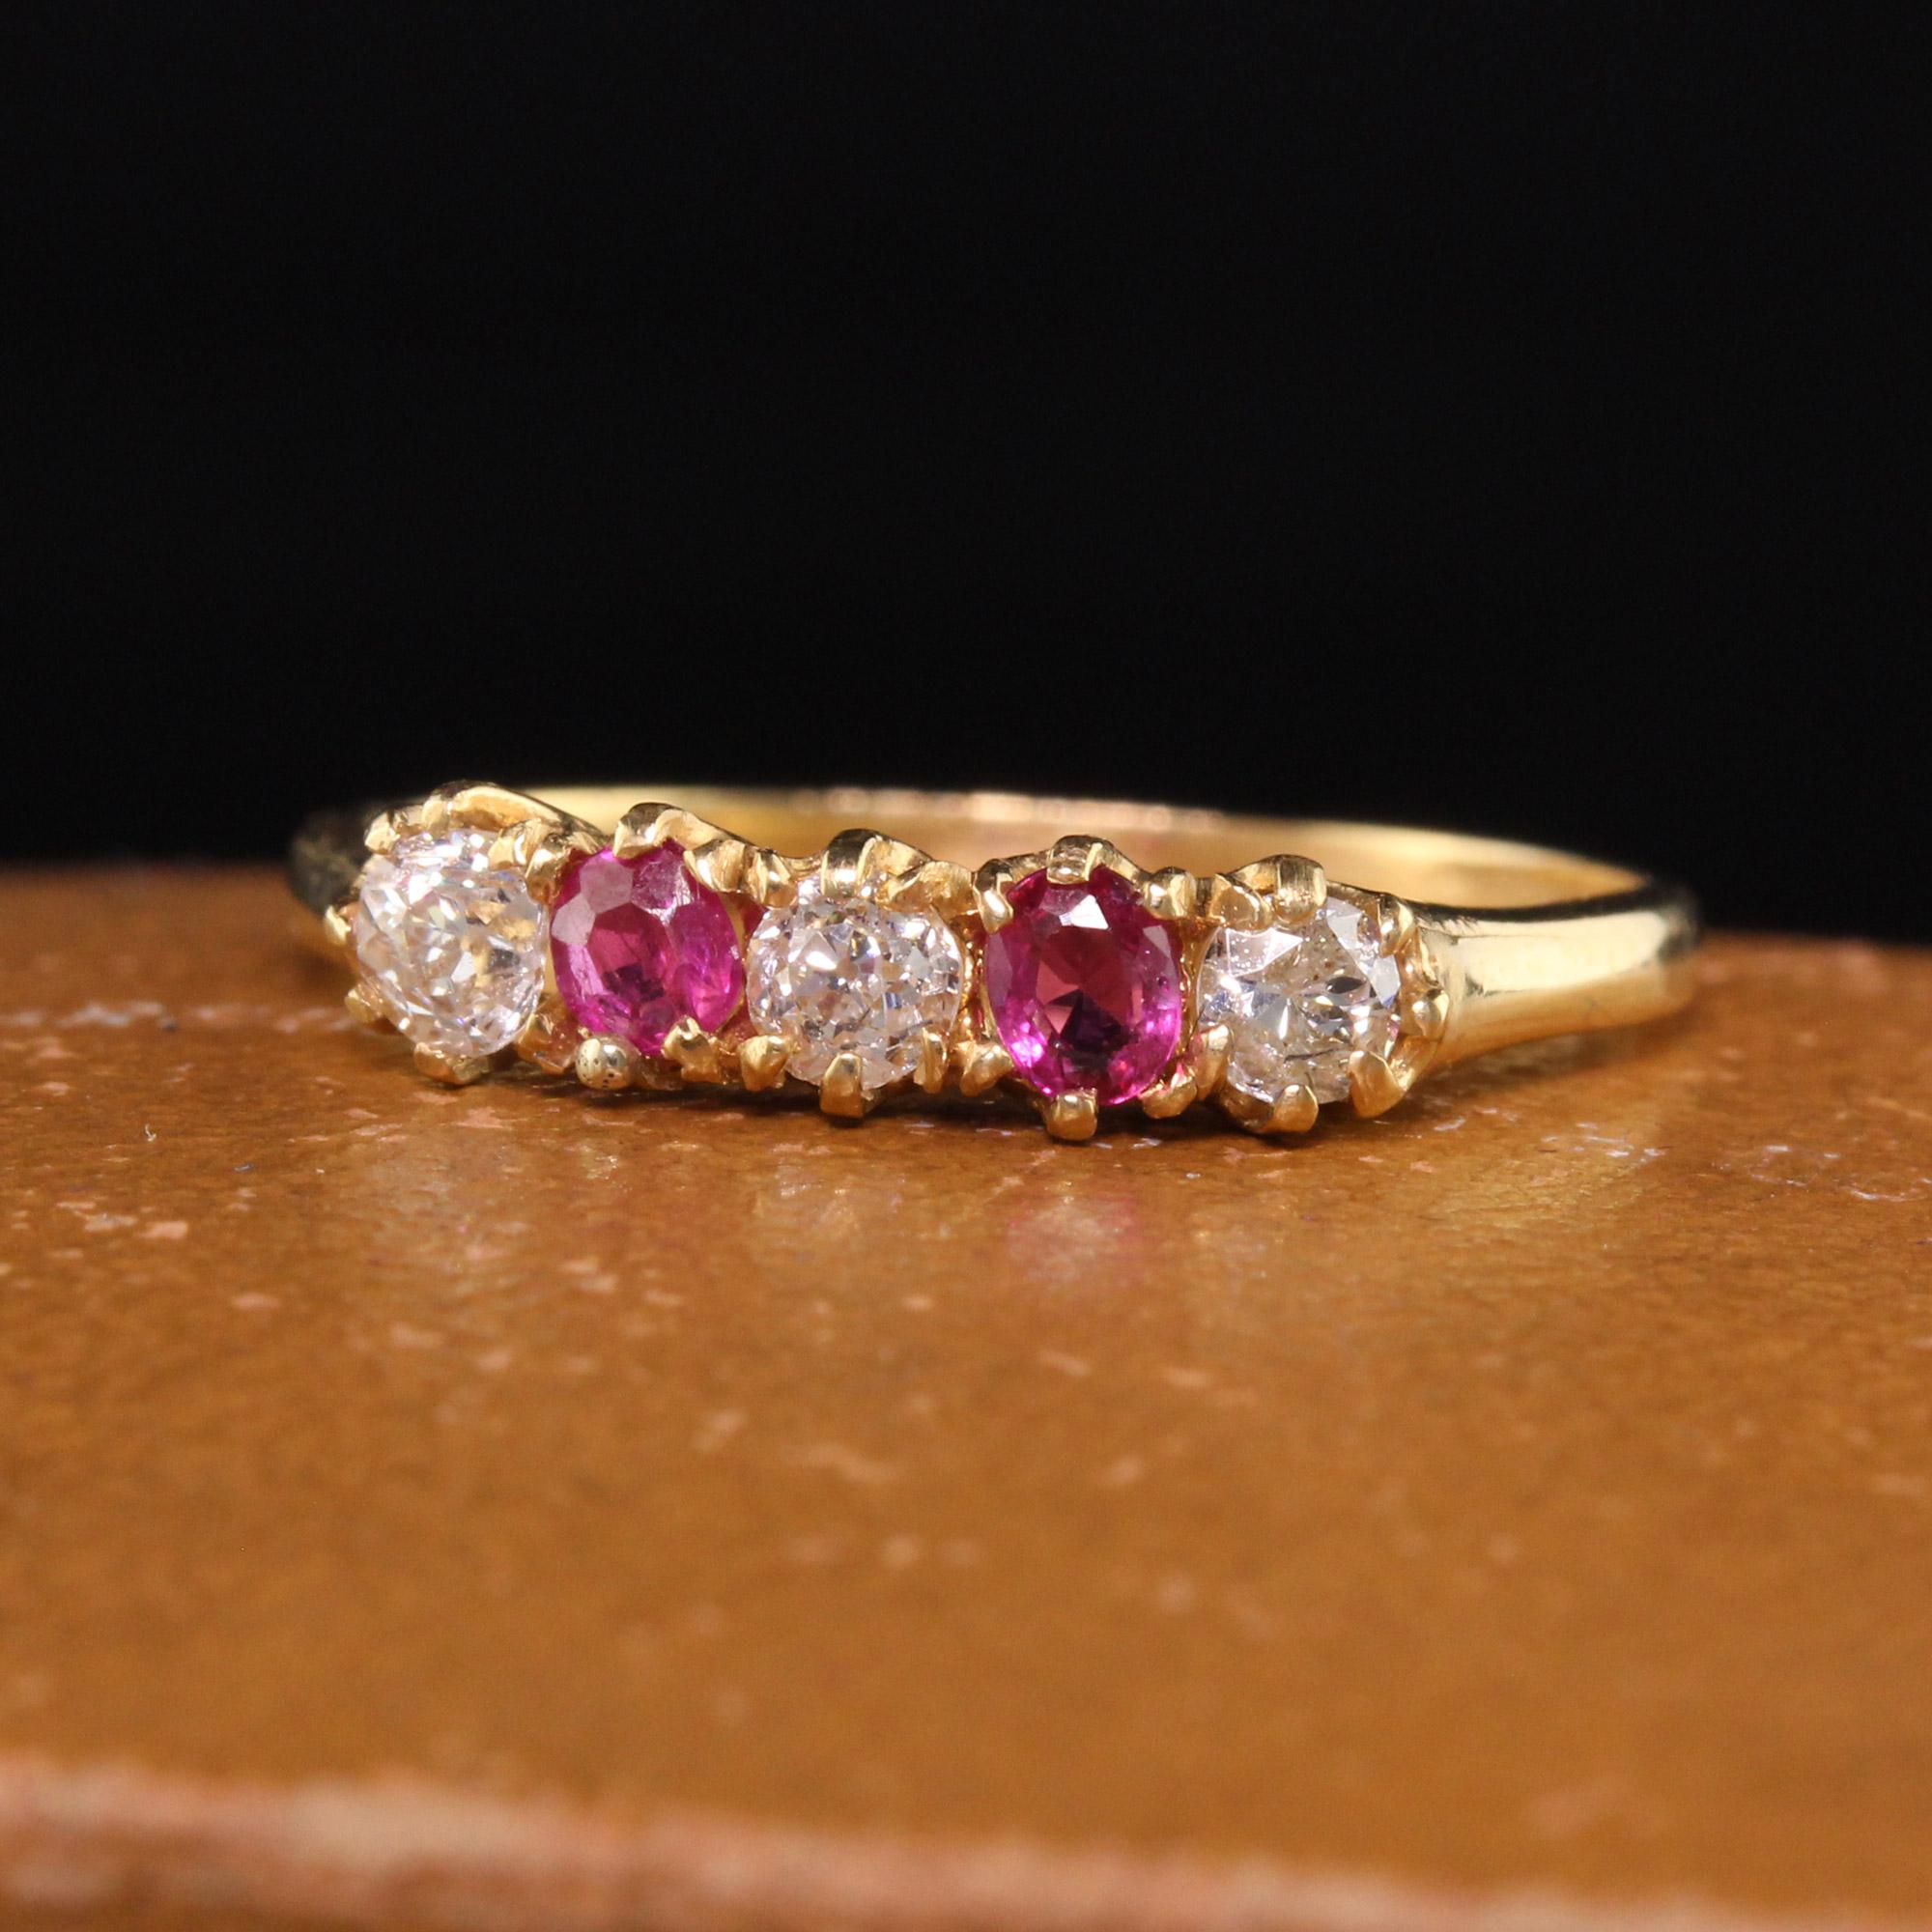 Beautiful Antique Victorian 18K Yellow Gold Old Mine Diamond and Ruby Wedding Band. This amazing Victorian wedding band is crafted in 18K yellow gold and has old mine cut diamonds and rubies on the top.

Item #R1196

Metal: 18K Yellow Gold

Weight: